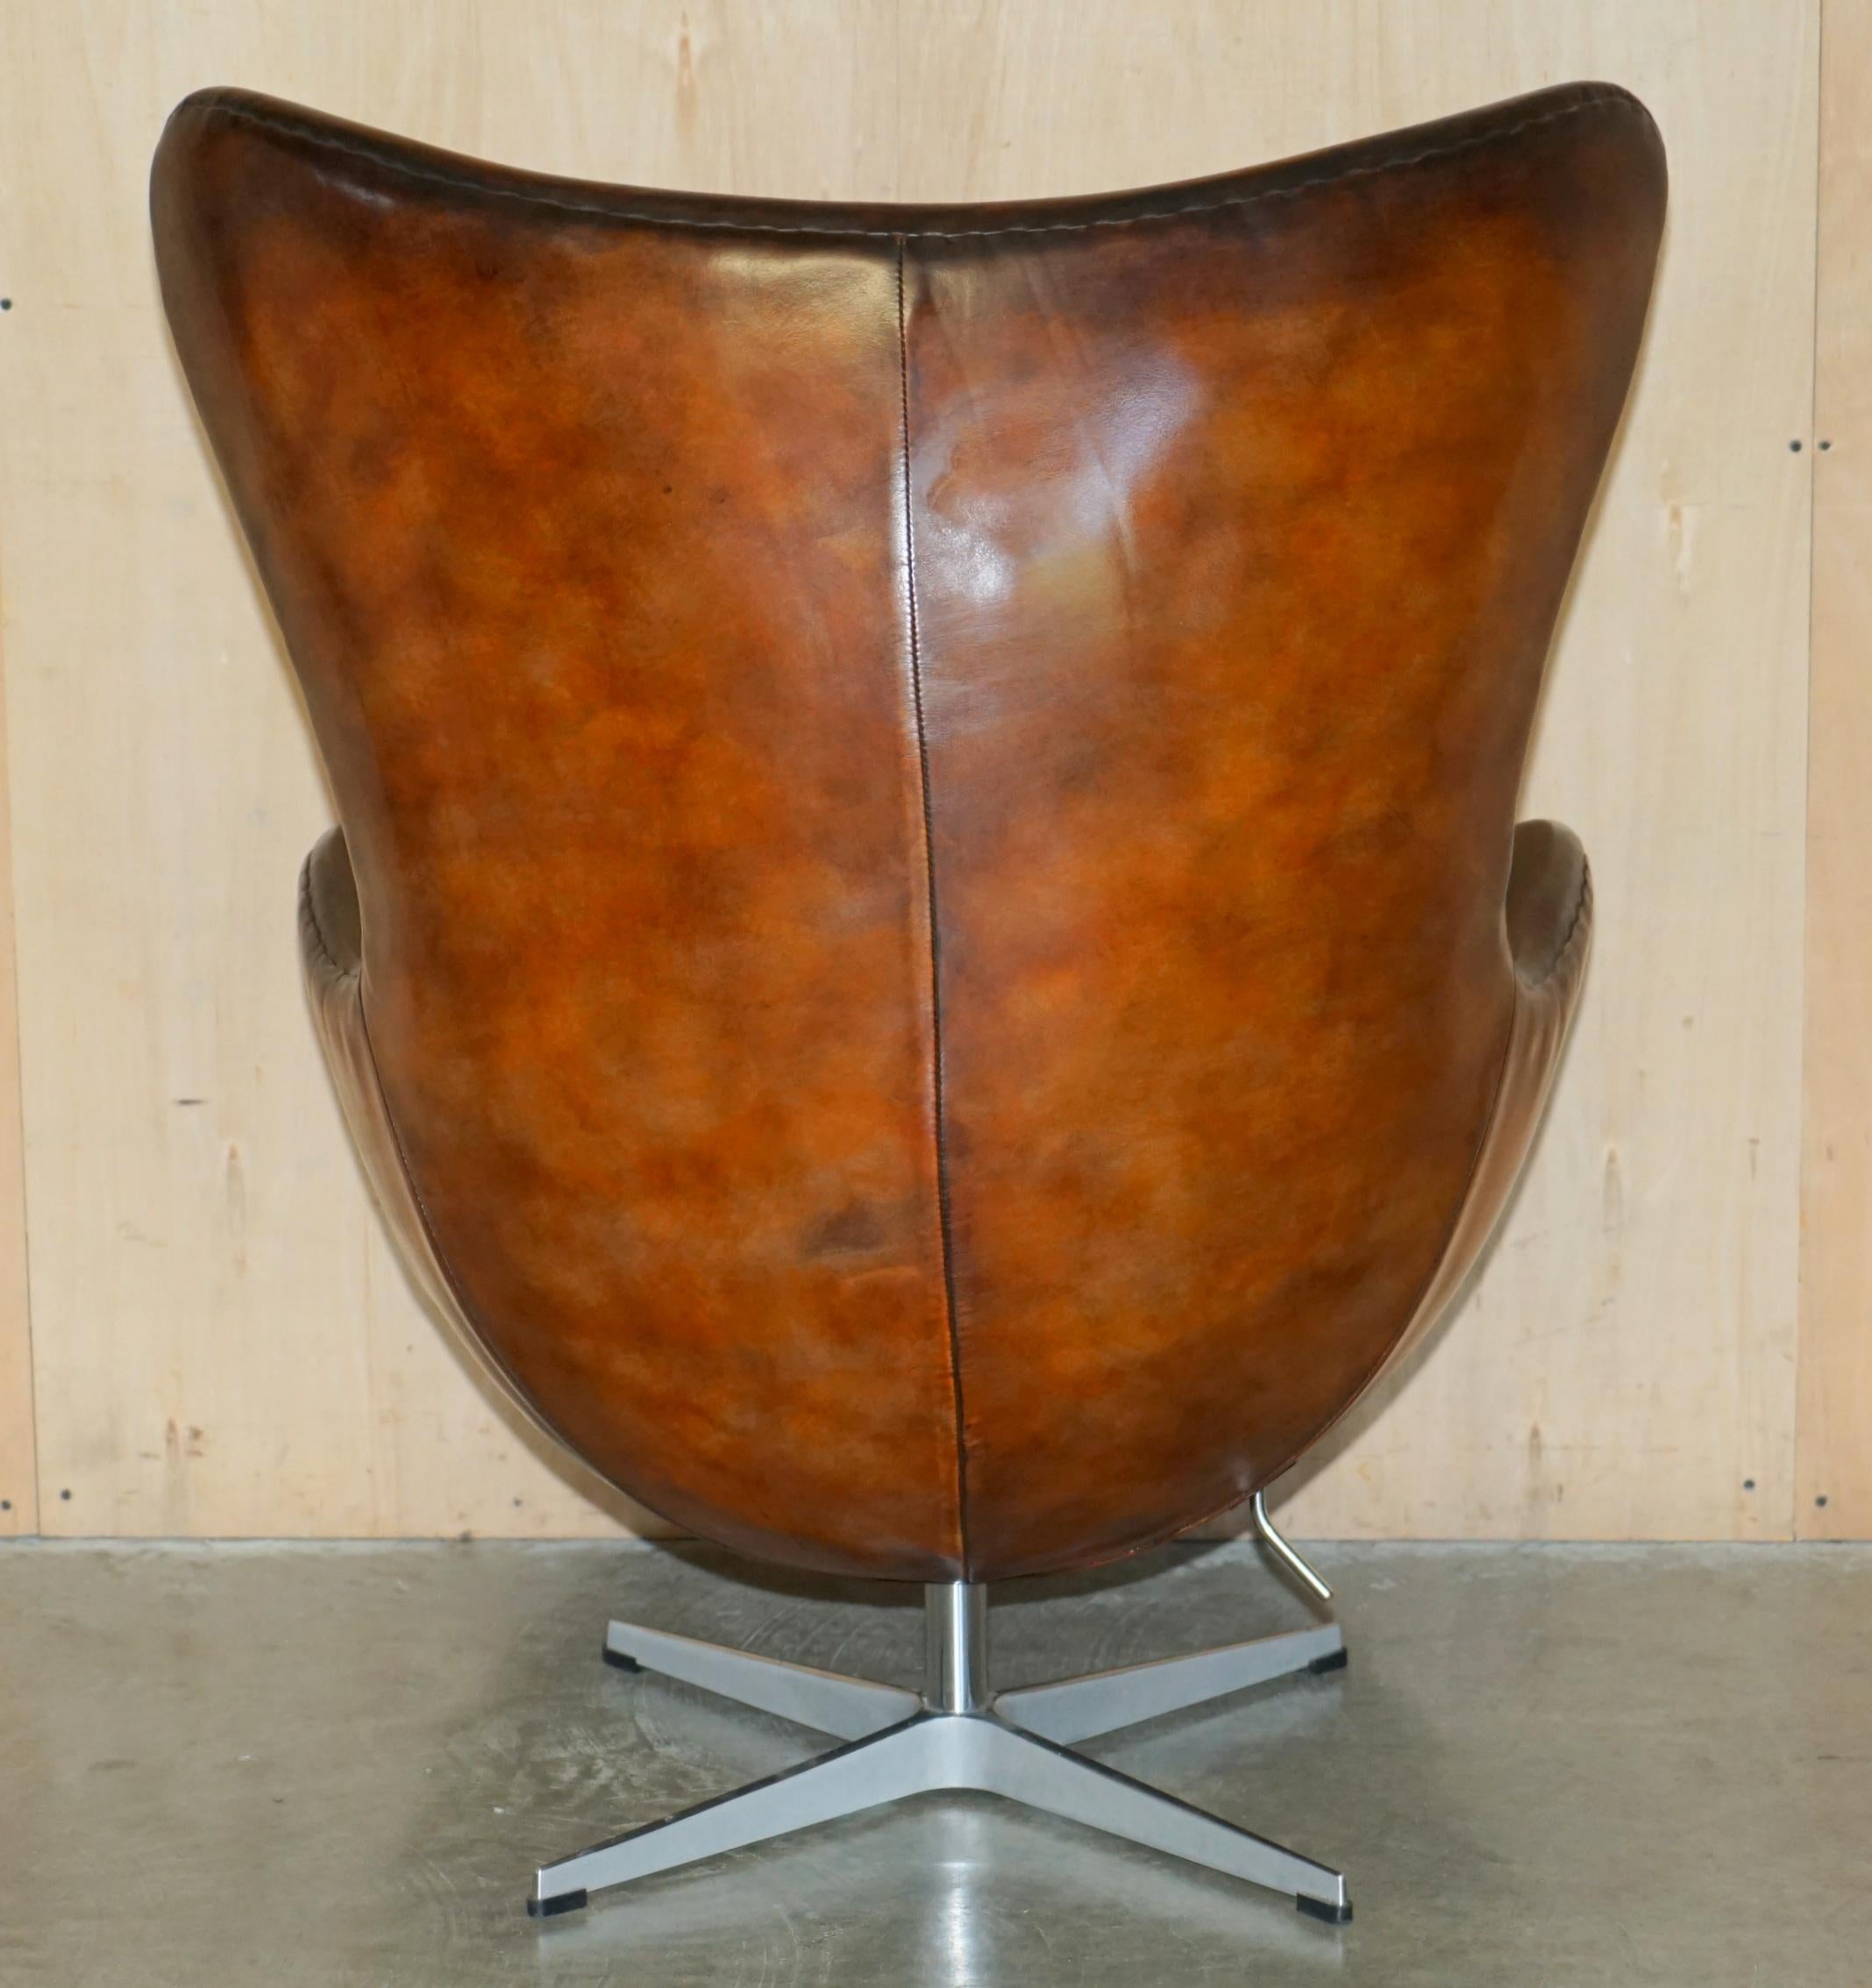 1 of 2 Vintage Fully Restored Fritz Hansen Style Egg Chair Whisky Brown Leather For Sale 9